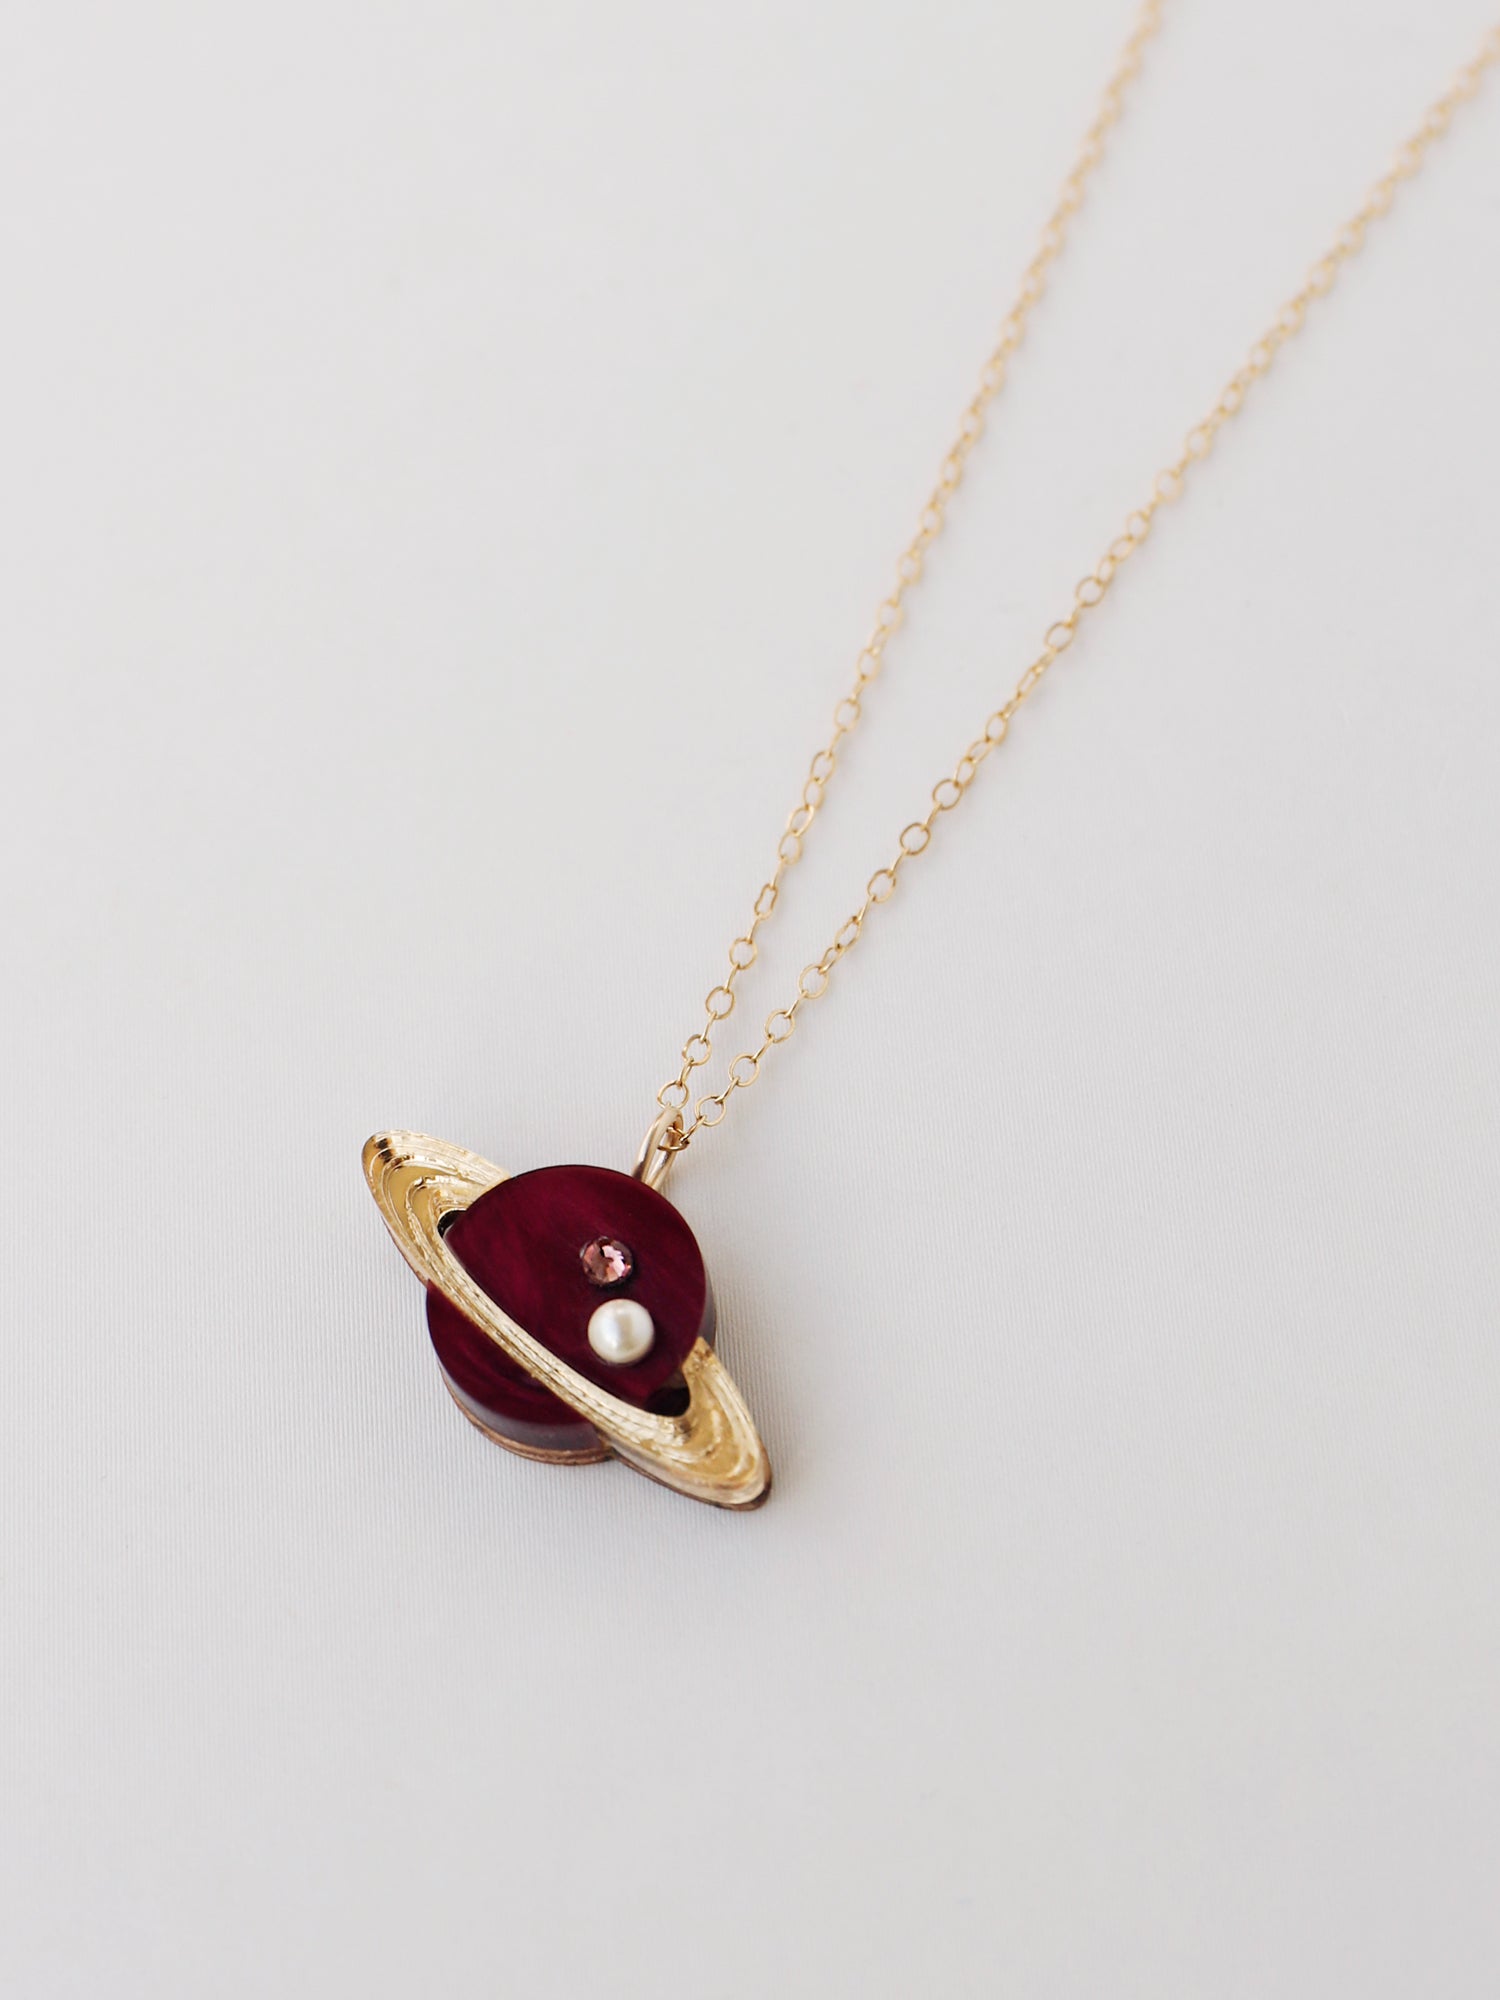 Saturn pendant necklace in pearlescent cherry acrylic, embellished with high quality glass pearls & crystals. Wear with our 14k gold-filled chain. Handmade in London by Wolf & Moon.